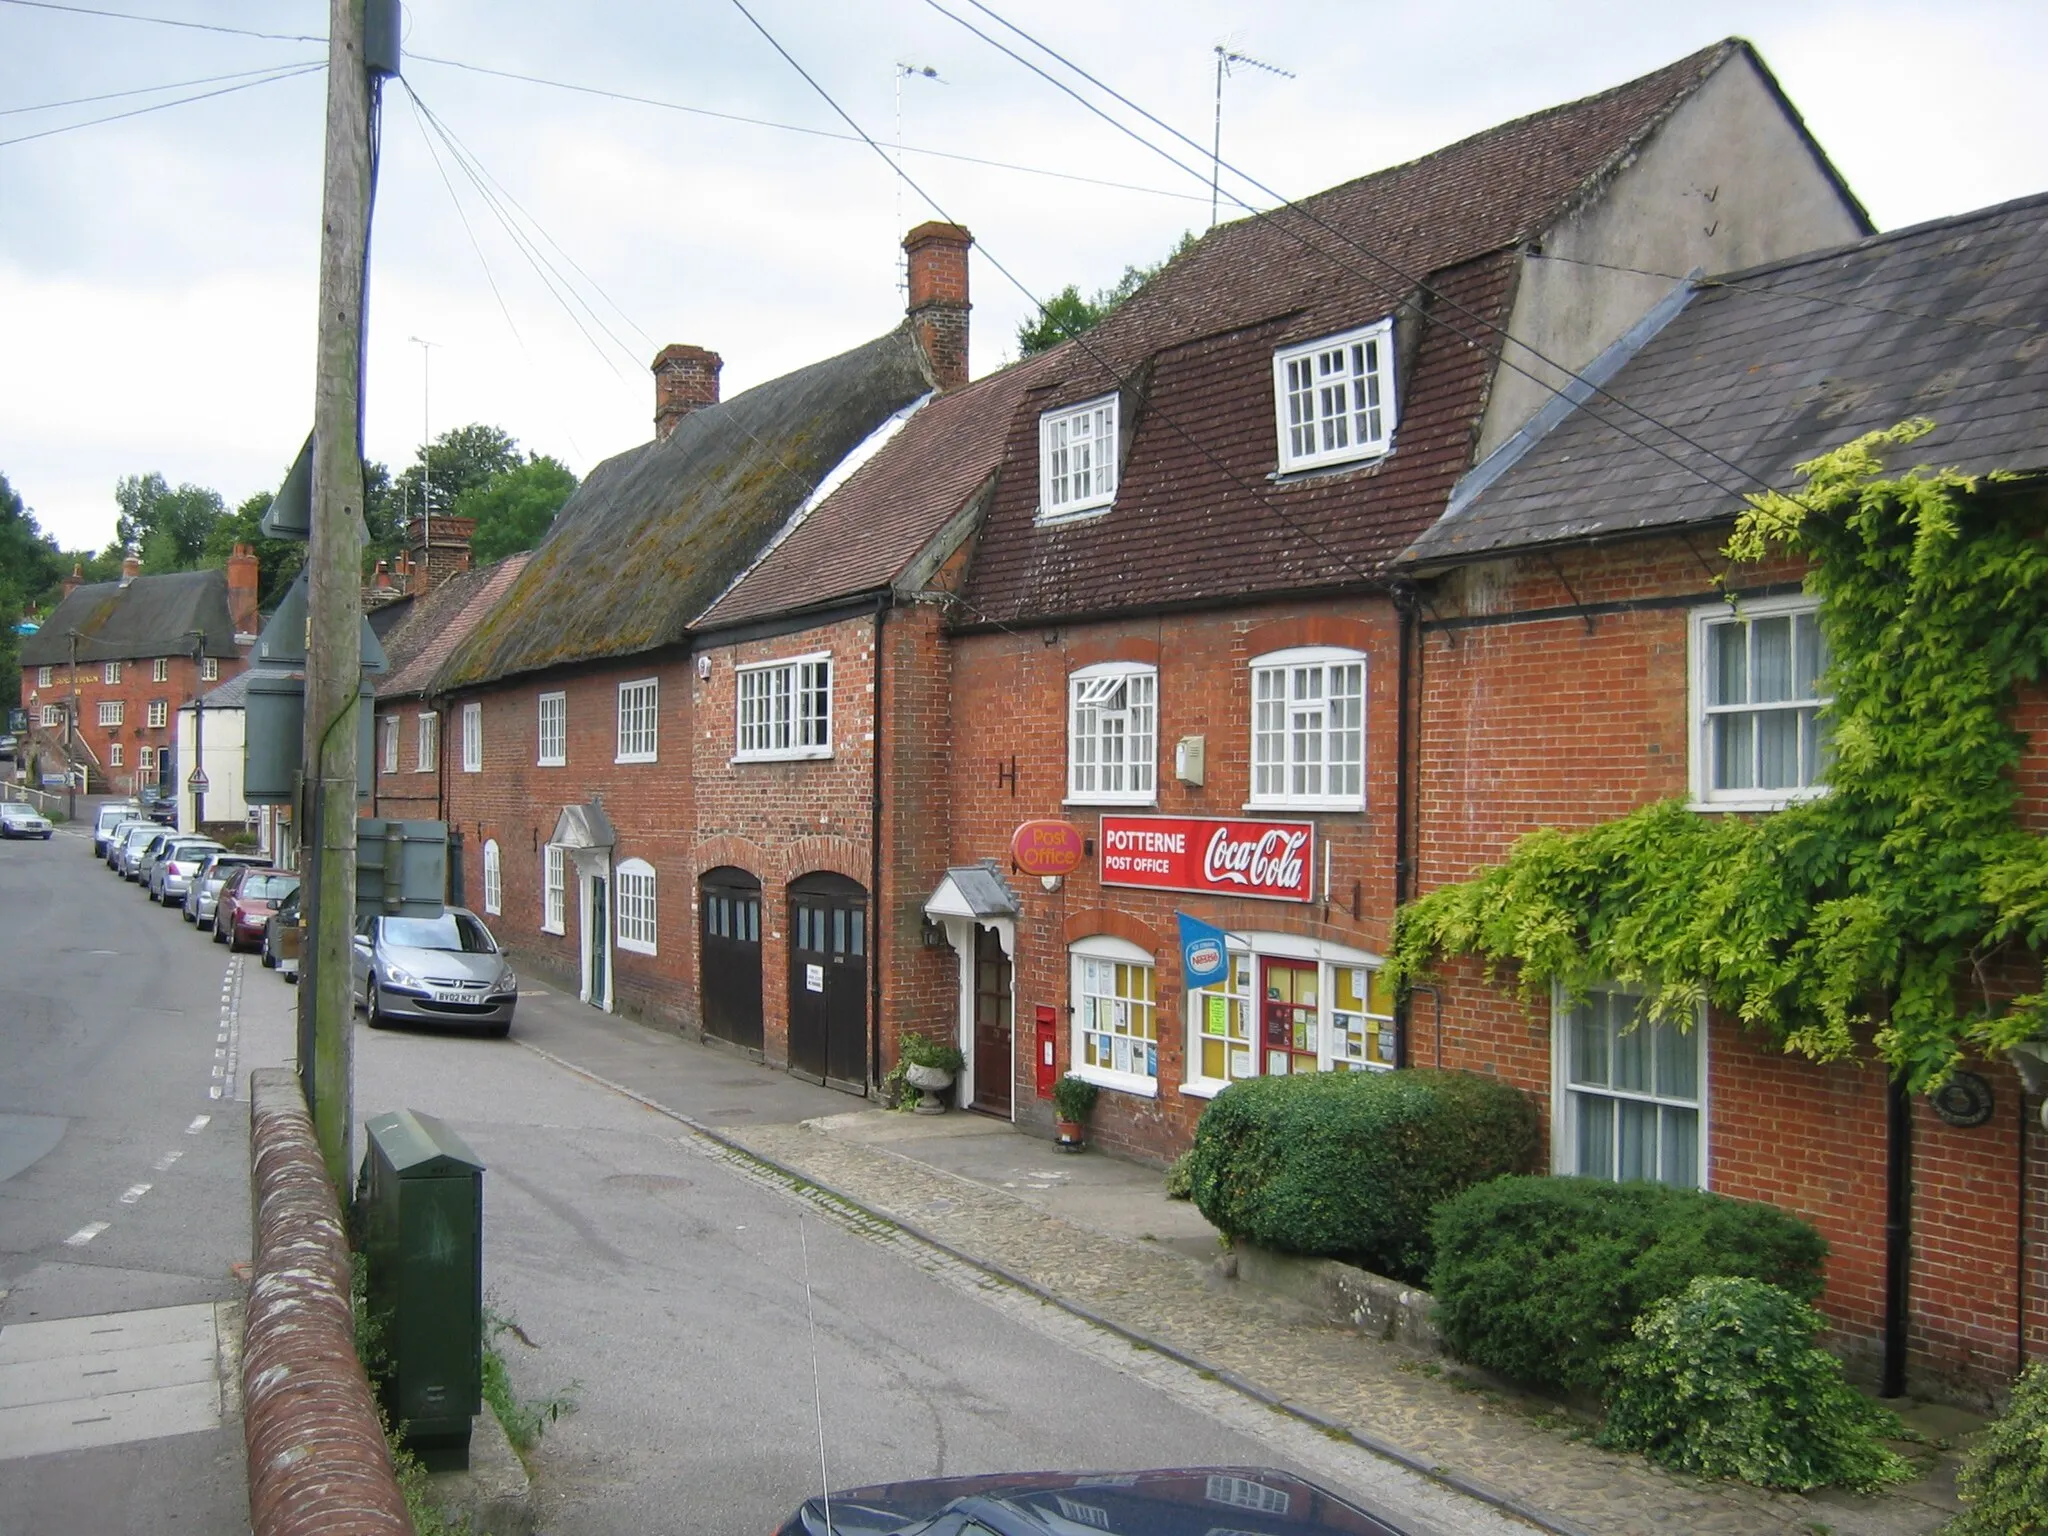 Photo showing: Potterne village centre, with George & Dragon pub visible in the background